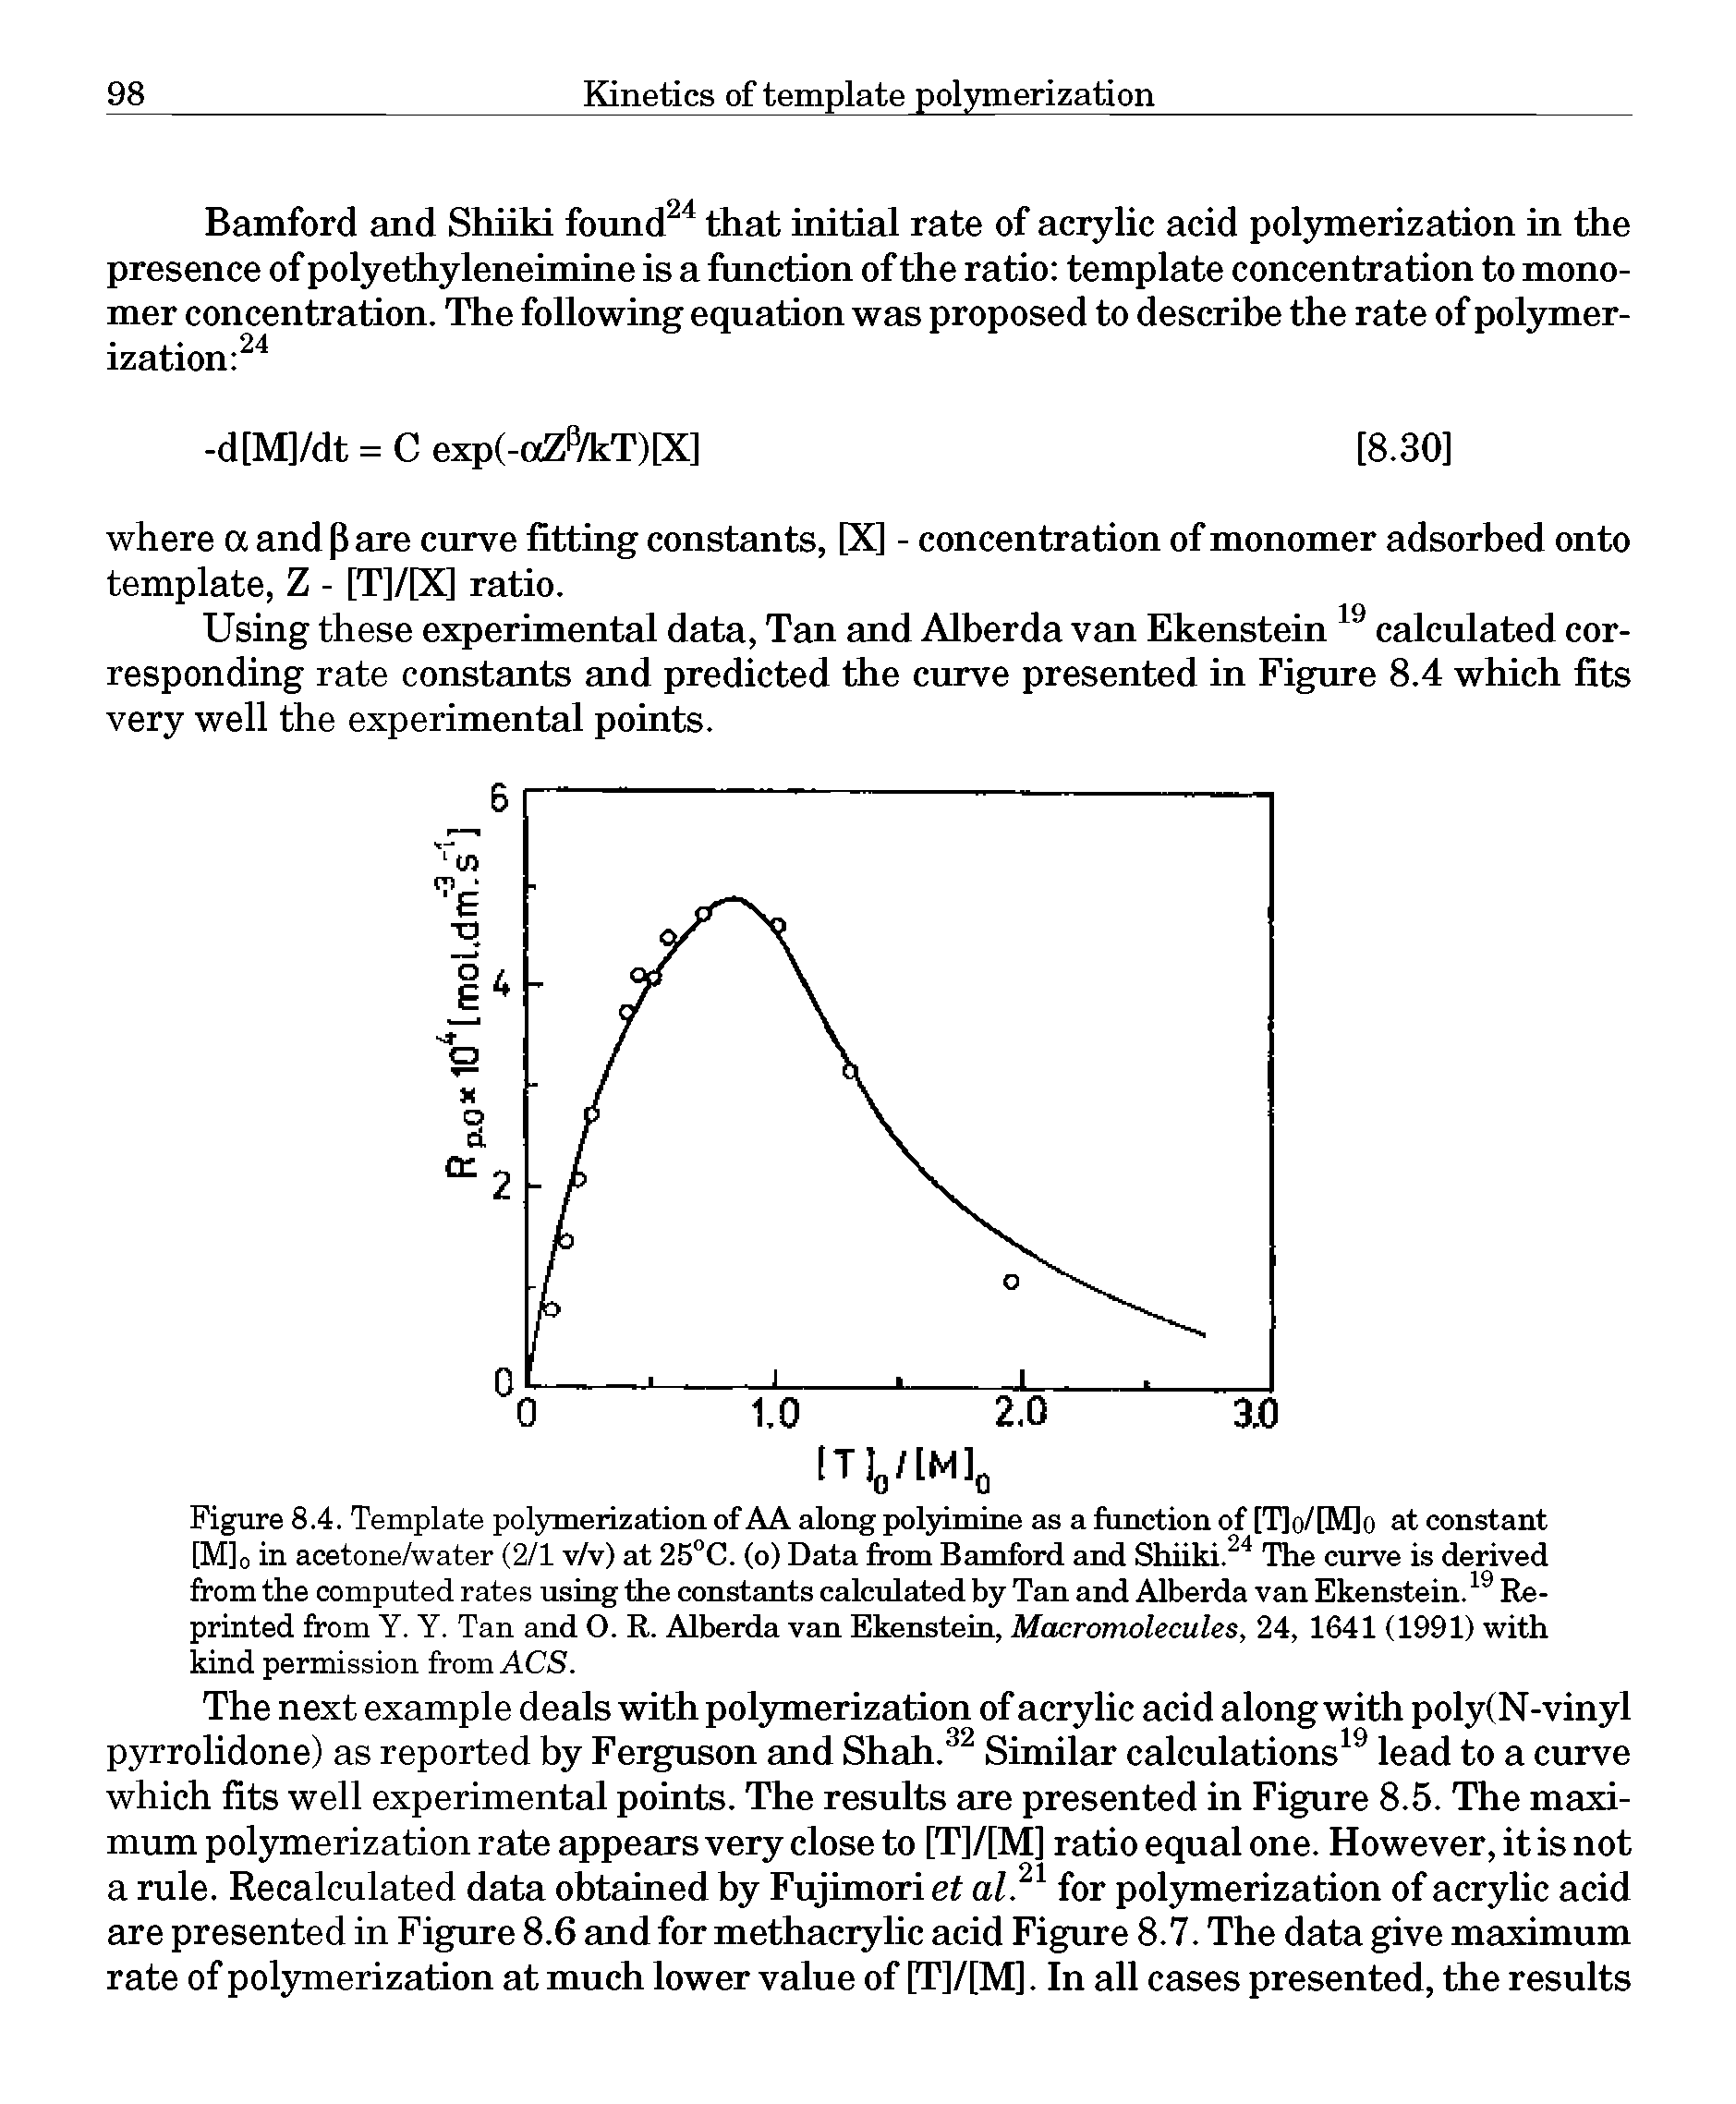 Figure 8.4. Template polymerization of AA along polyimine as a fnnction of [T]o/[M]o at constant [M]o in acetone/water (2/1 v/v) at 25°C. (o) Data from Bamford and Shuki. " The curve is derived from the computed rates using the constants calculated by Tan and Alberda van Ekenstein. Reprinted from Y. Y. Tan and O. R. Alberda van Ekenstein, Macromolecules, 24, 1641 (1991) with kind permission from ACS.